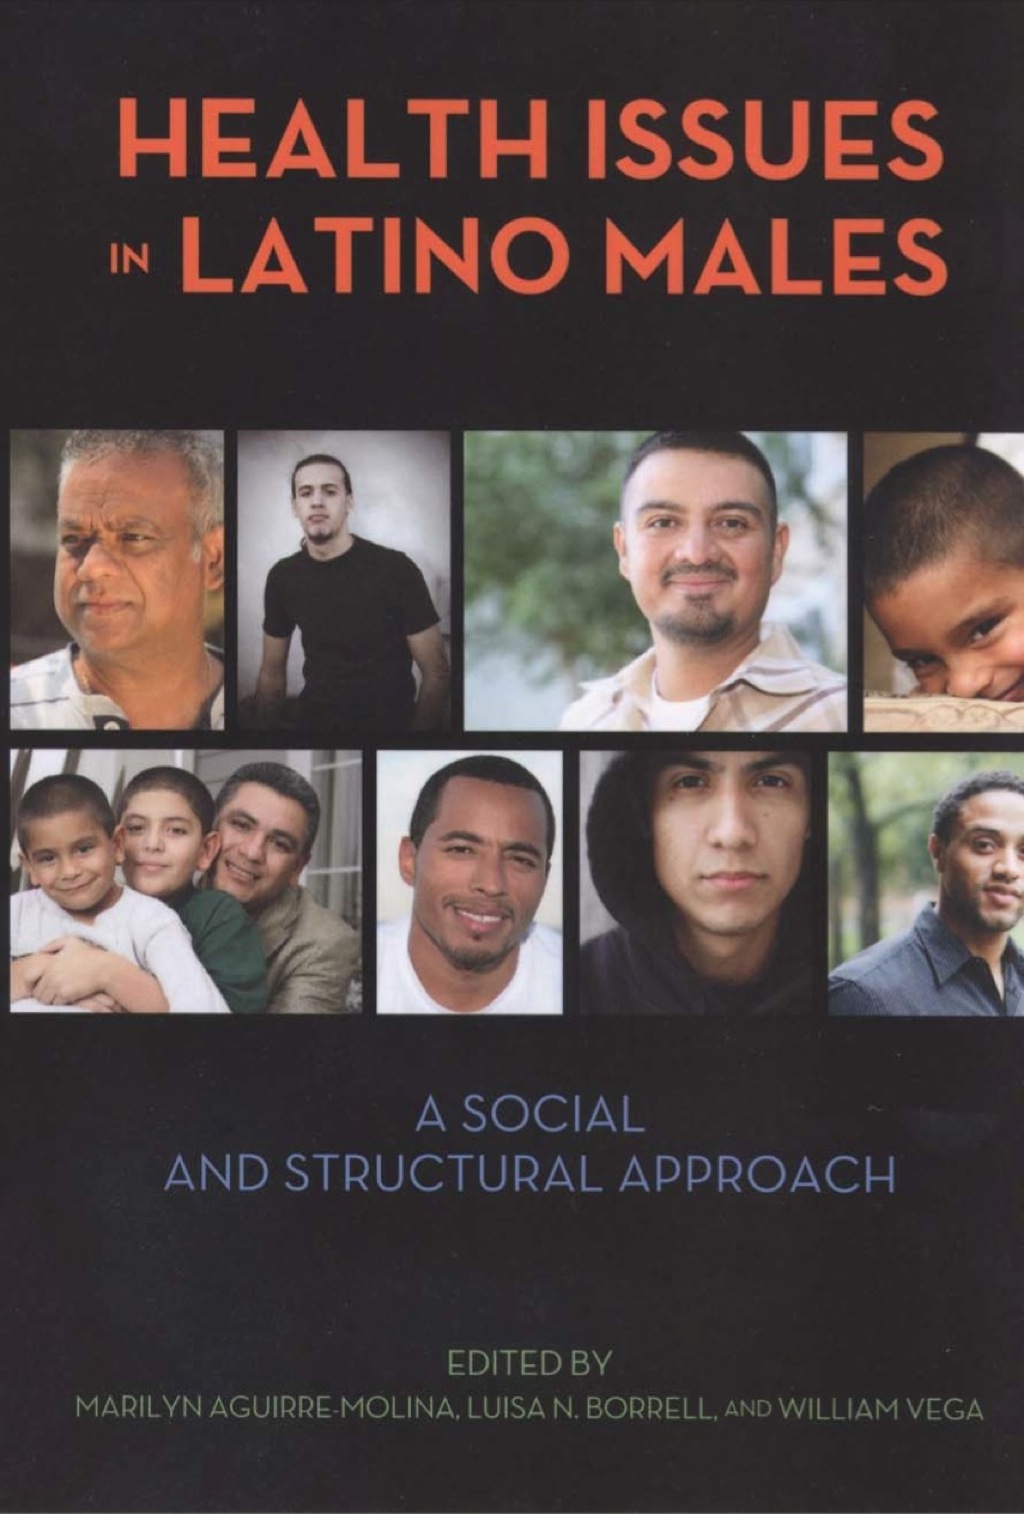 Health Issues in Latino Males (eBook) - Marilyn Aguirre-Molina,